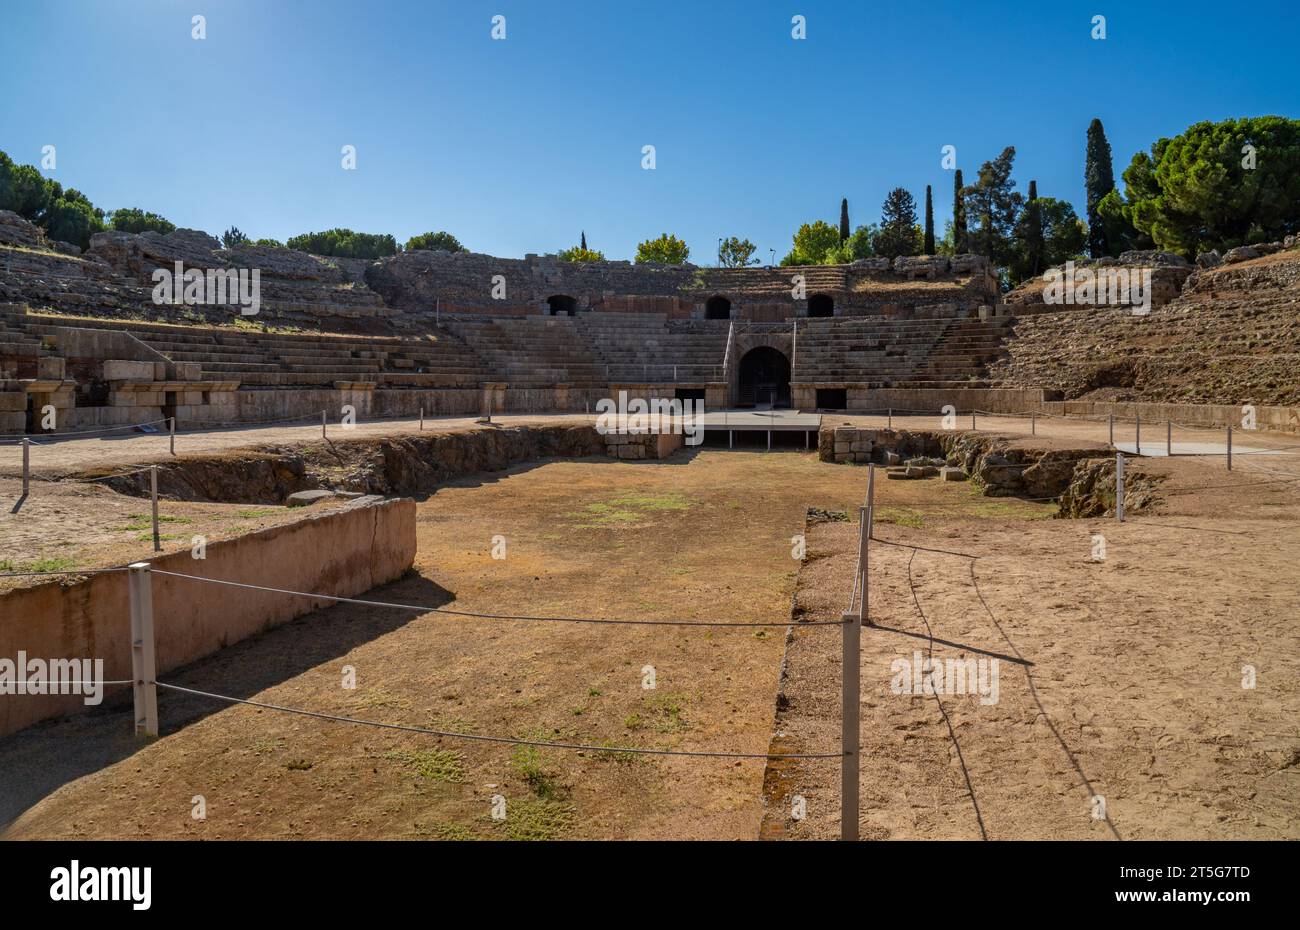 View from the arena of the Roman Amphitheater of Mérida illuminated by the light of dawn creating shadows on its stands in Badajoz, Extremadura, Spain Stock Photo